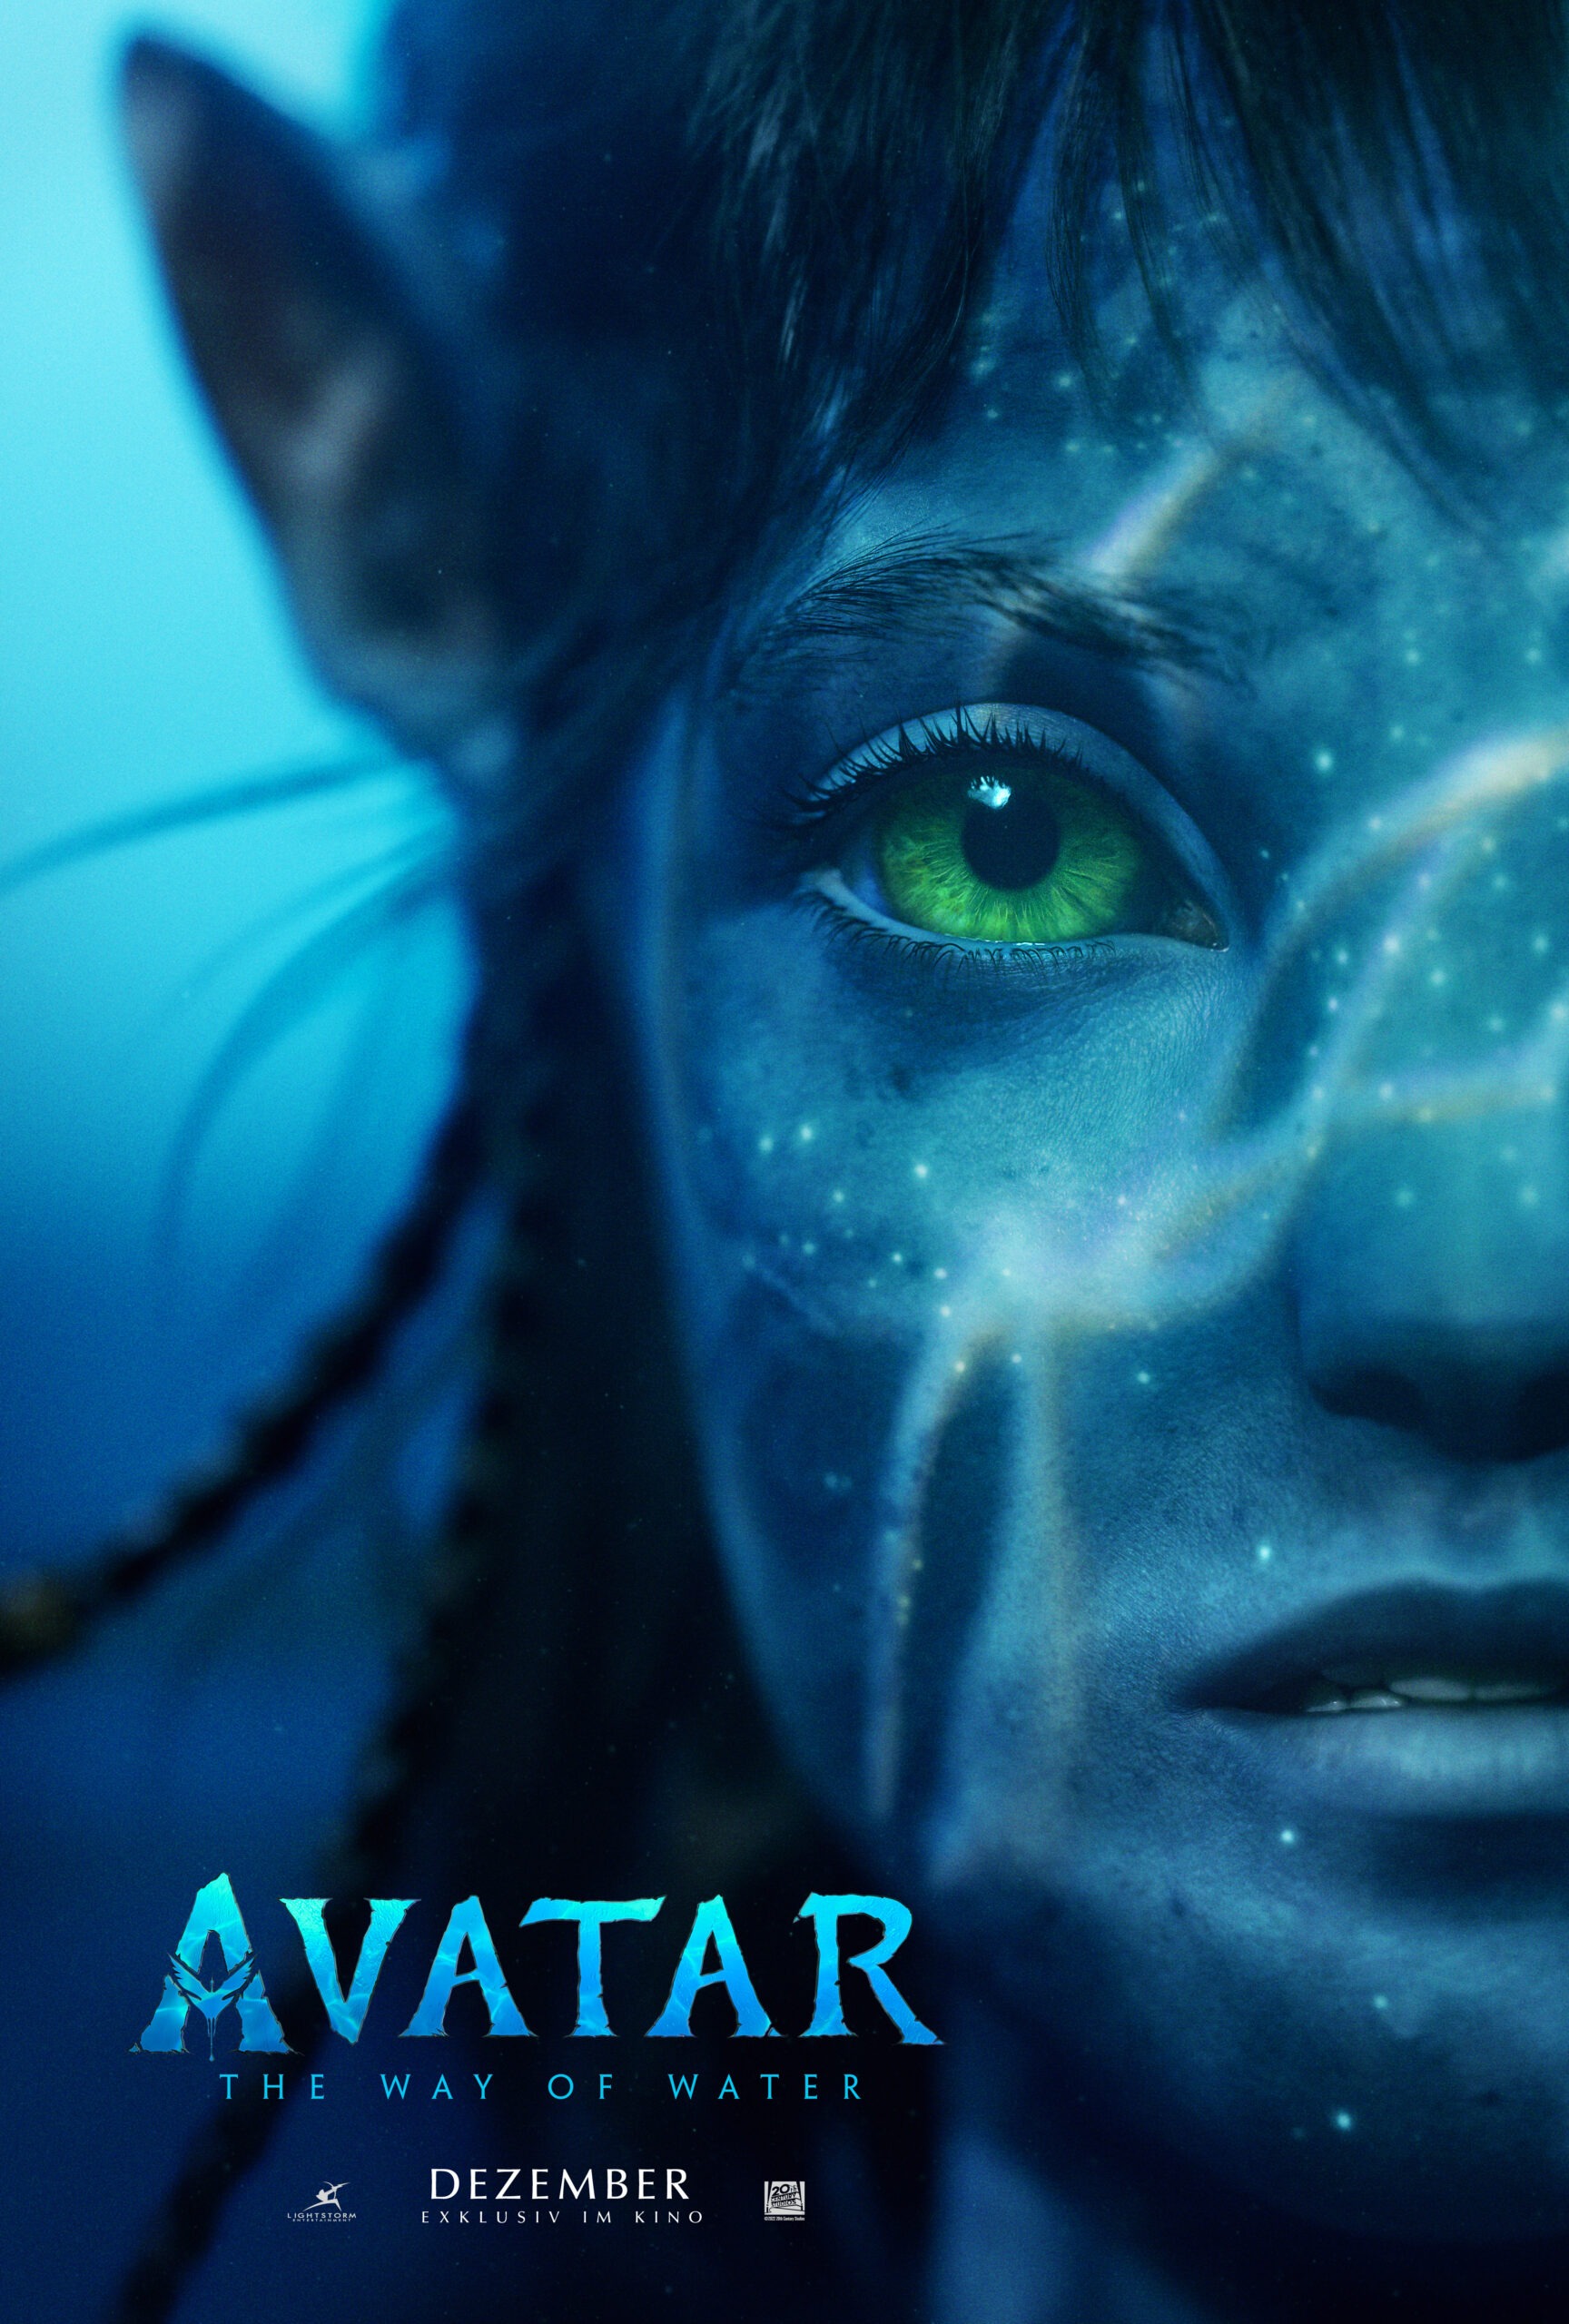 Avatar 2 - The Way of Water - Teaser Poster